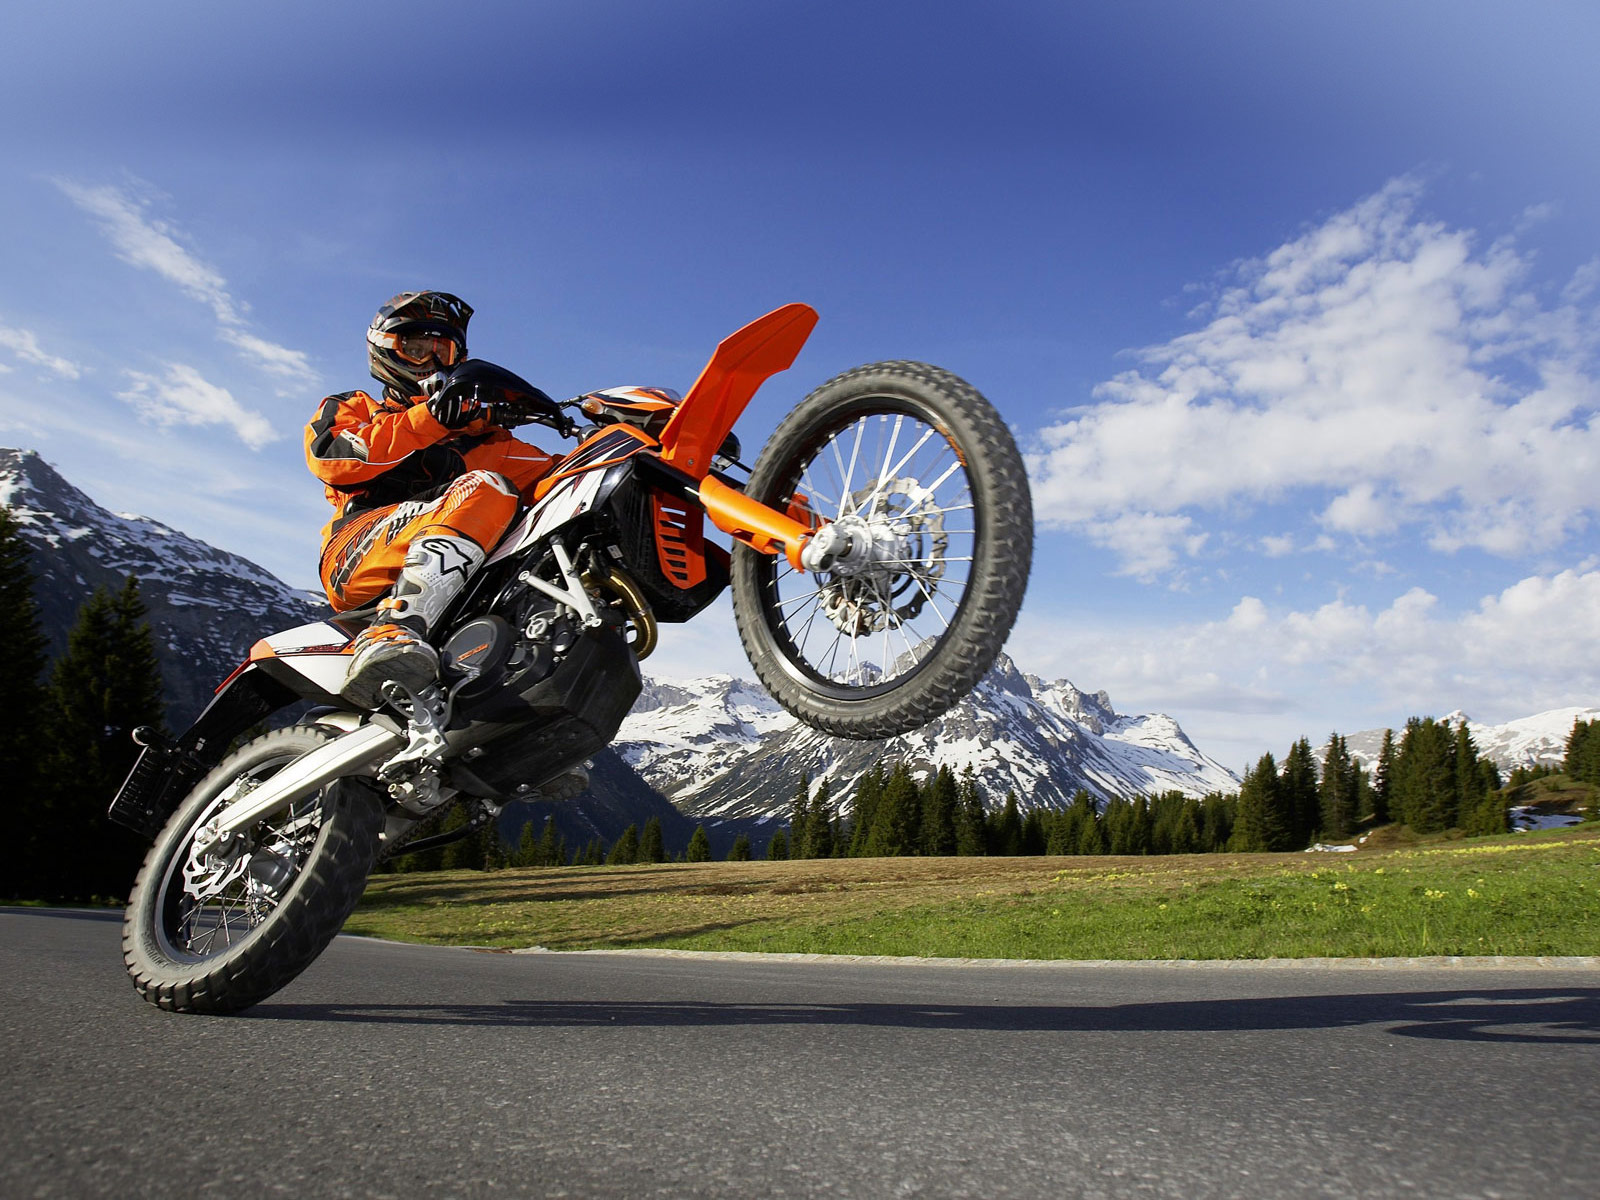 KTM Supermoto Action Wallpaper For Android Wallpaper High resolution